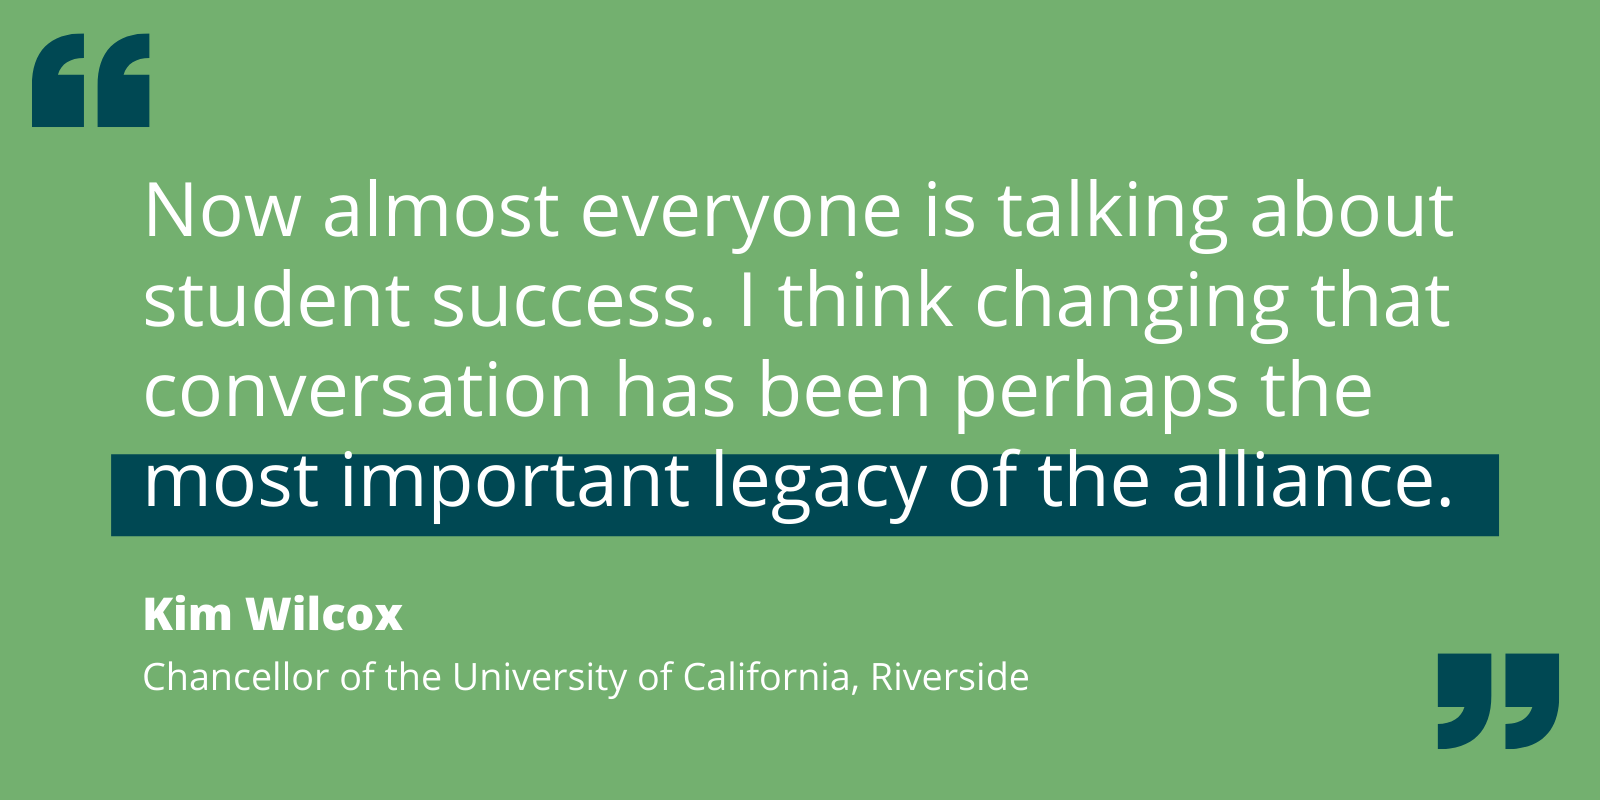 Quote by Kim Wilcox re how changing the conversation to student success has been the UIA's most important legacy.